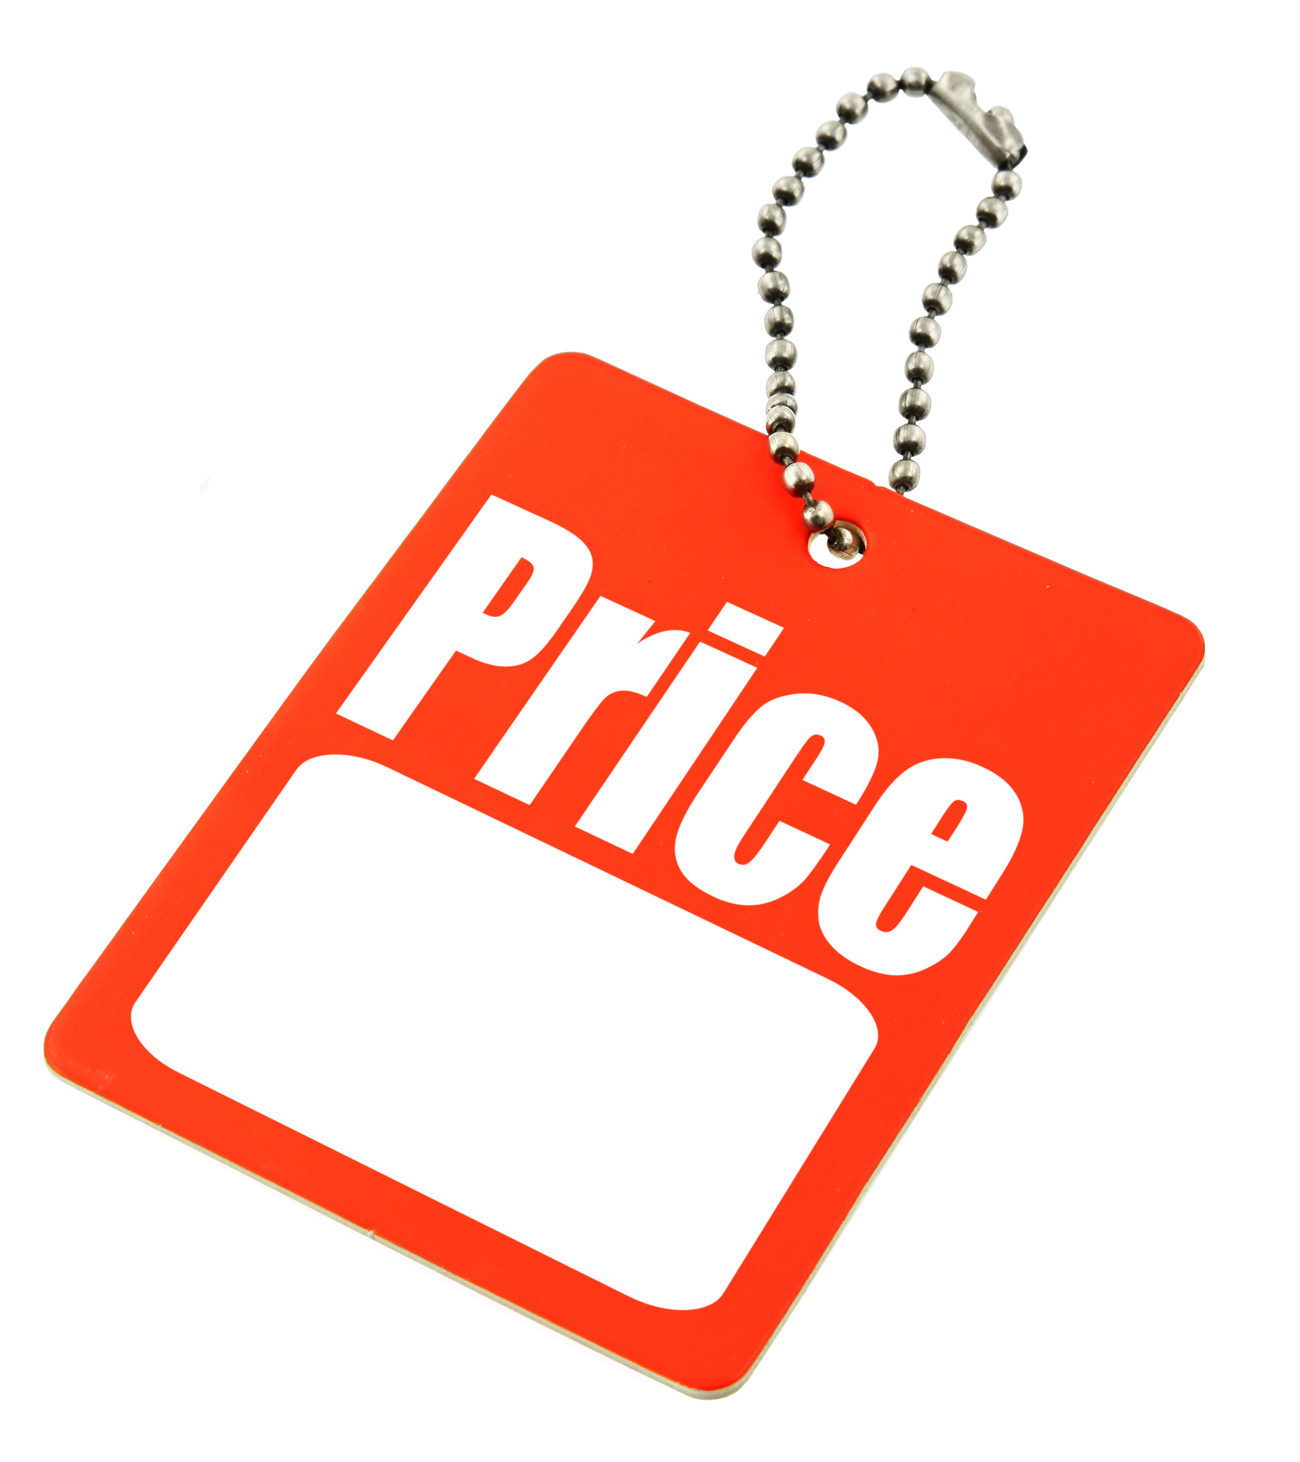 Free Price Tag Images Download Free Price Tag Images png images Free